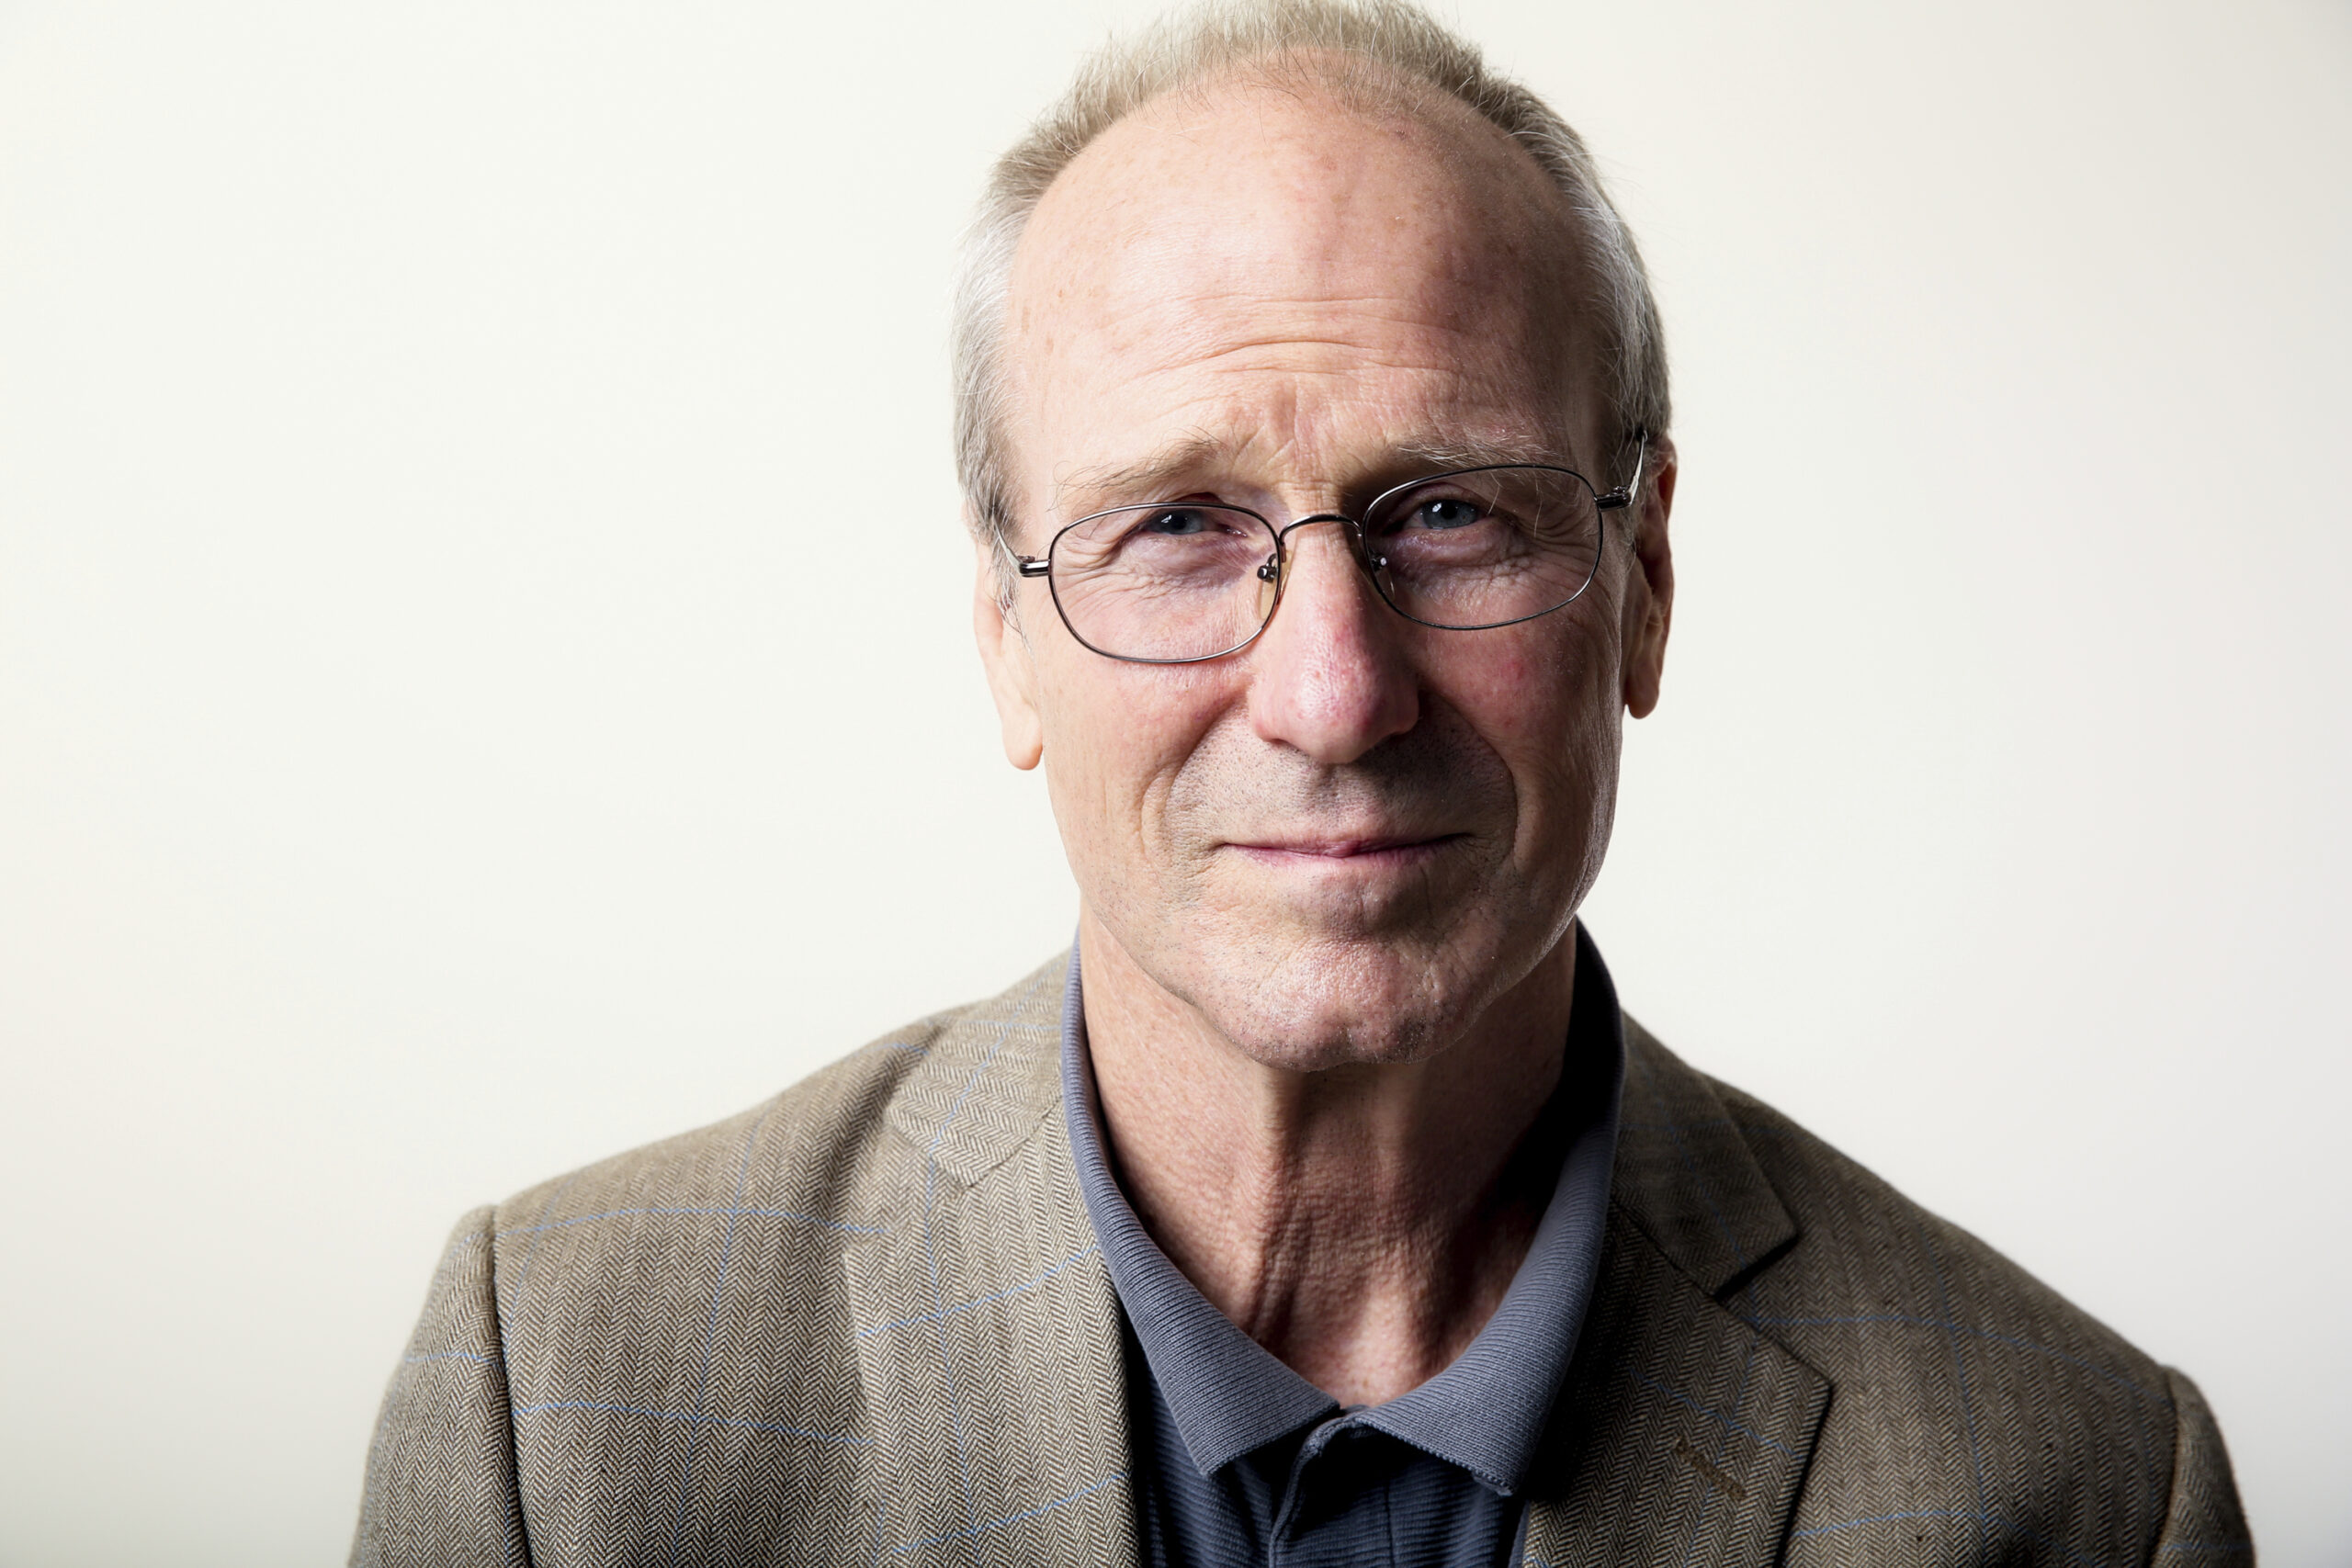 FILE - William Hurt, a cast member in the Amazon series "Goliath," poses for a portrait during the 2016 Television Critics Association Summer Press Tour at the Beverly Hilton on Sunday, Aug. 7, 2016, in Beverly Hills, Calif. Hurt, the Oscar-winning actor of “Broadcast News,” “Body Heat” and “The Big Chill,” has died. He was 71. Hurt's son, Will, said in a statement that Hurt died Sunday, March 13, 2022 of natural causes. (Photo by Rich Fury/Invision/AP, File)